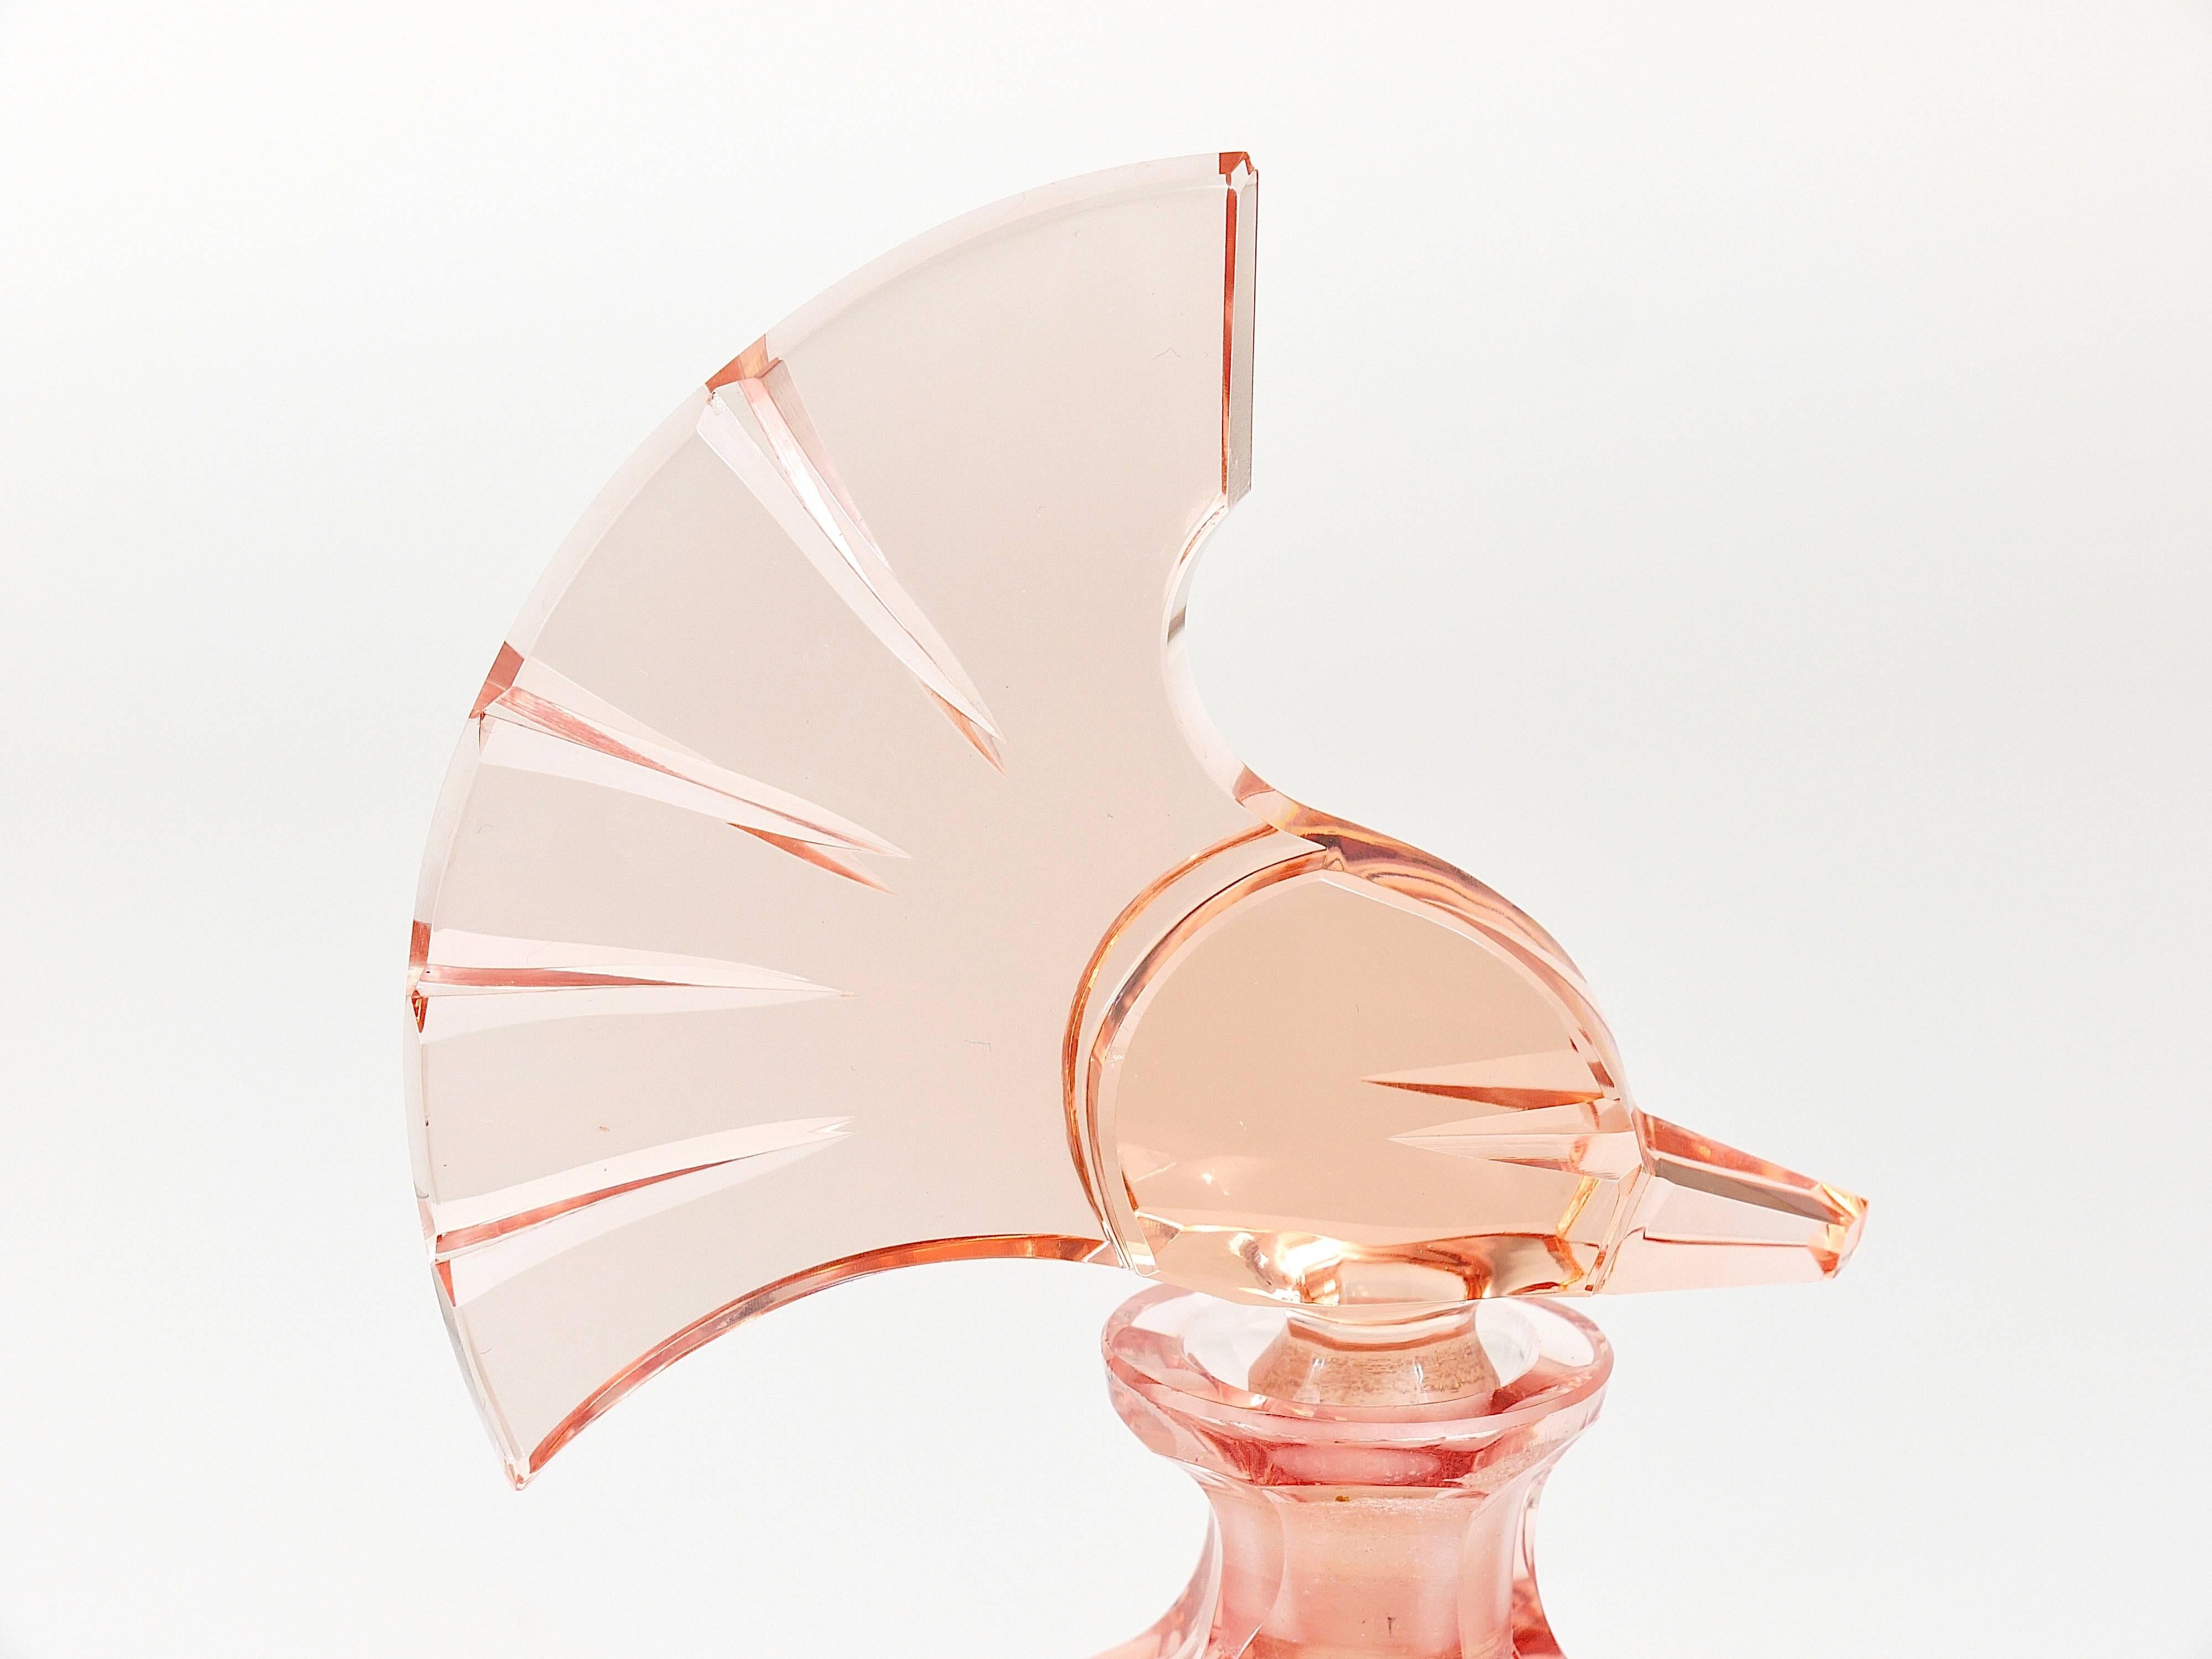 A beautiful and decorative Art Deco flacon bottle in the shape of a bird from the 1930s. Made of facetted rosé pink crystal glass, executed by Ludwig Moser in Czechoslovakia. Excellent condition.